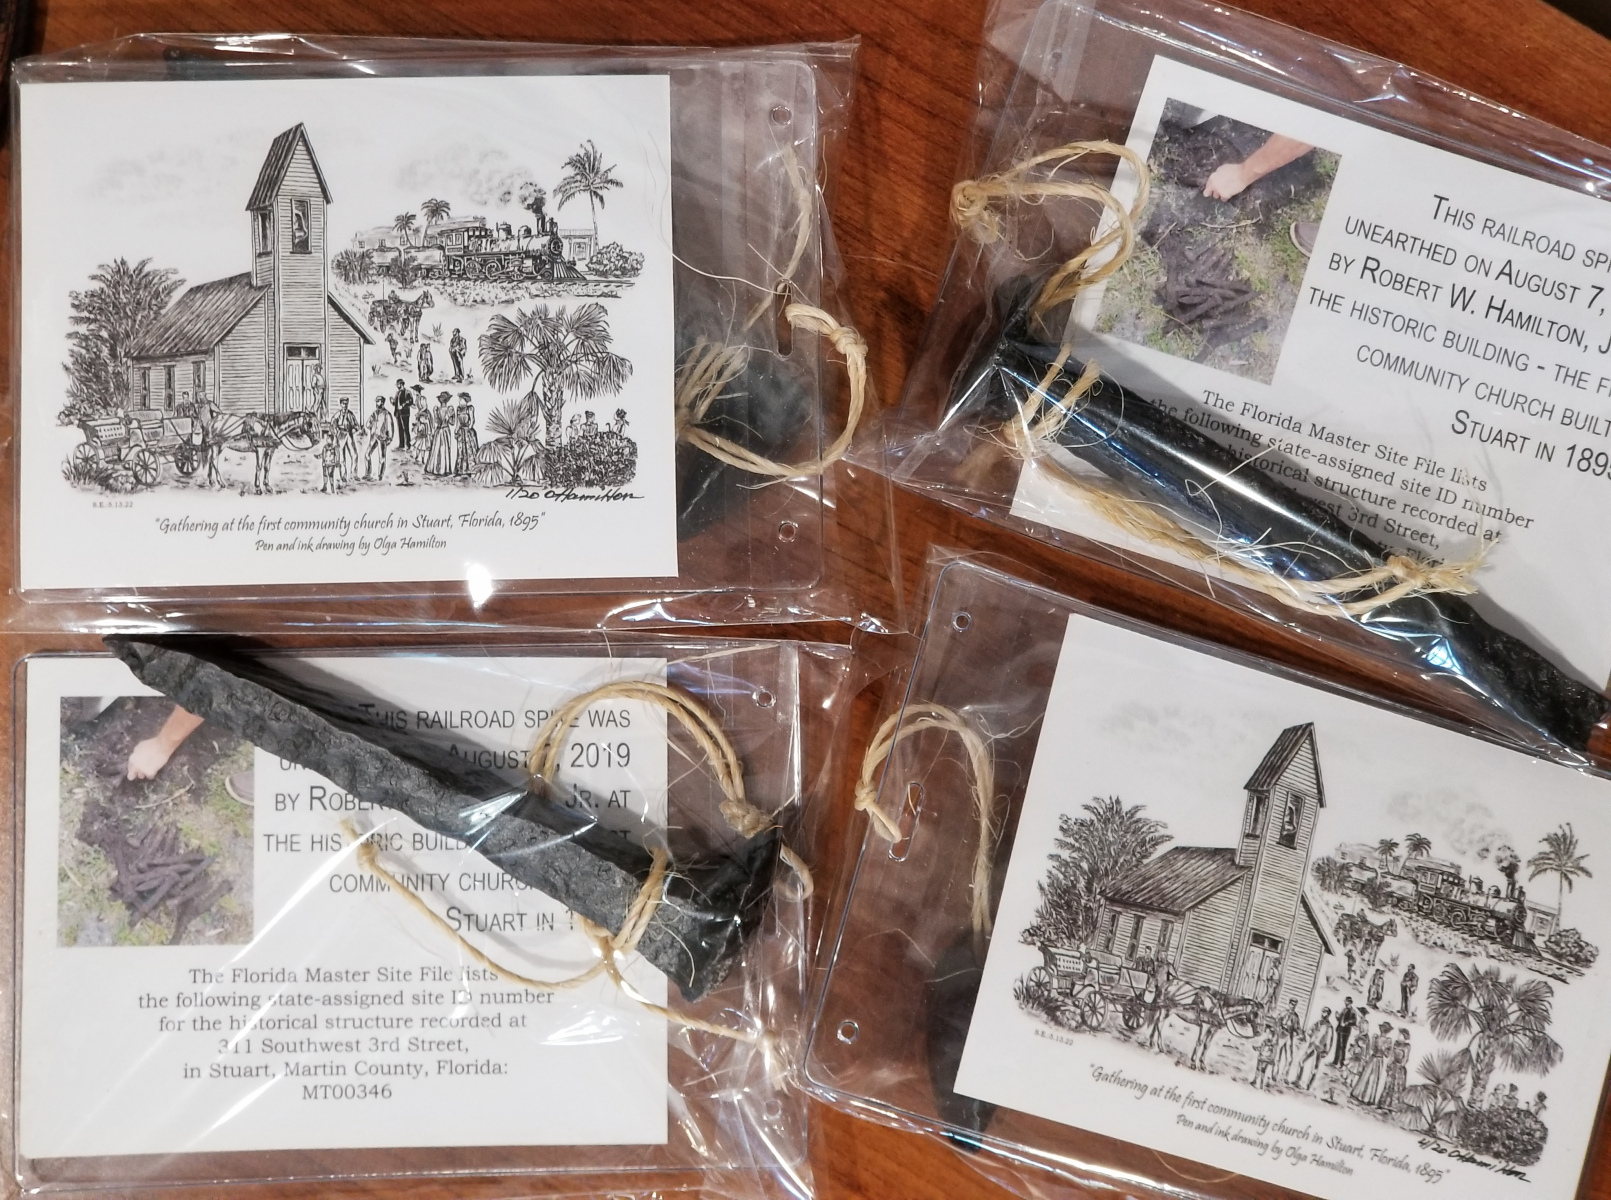 Art & Relics Sale to benefit the steeple restoration on the historic building